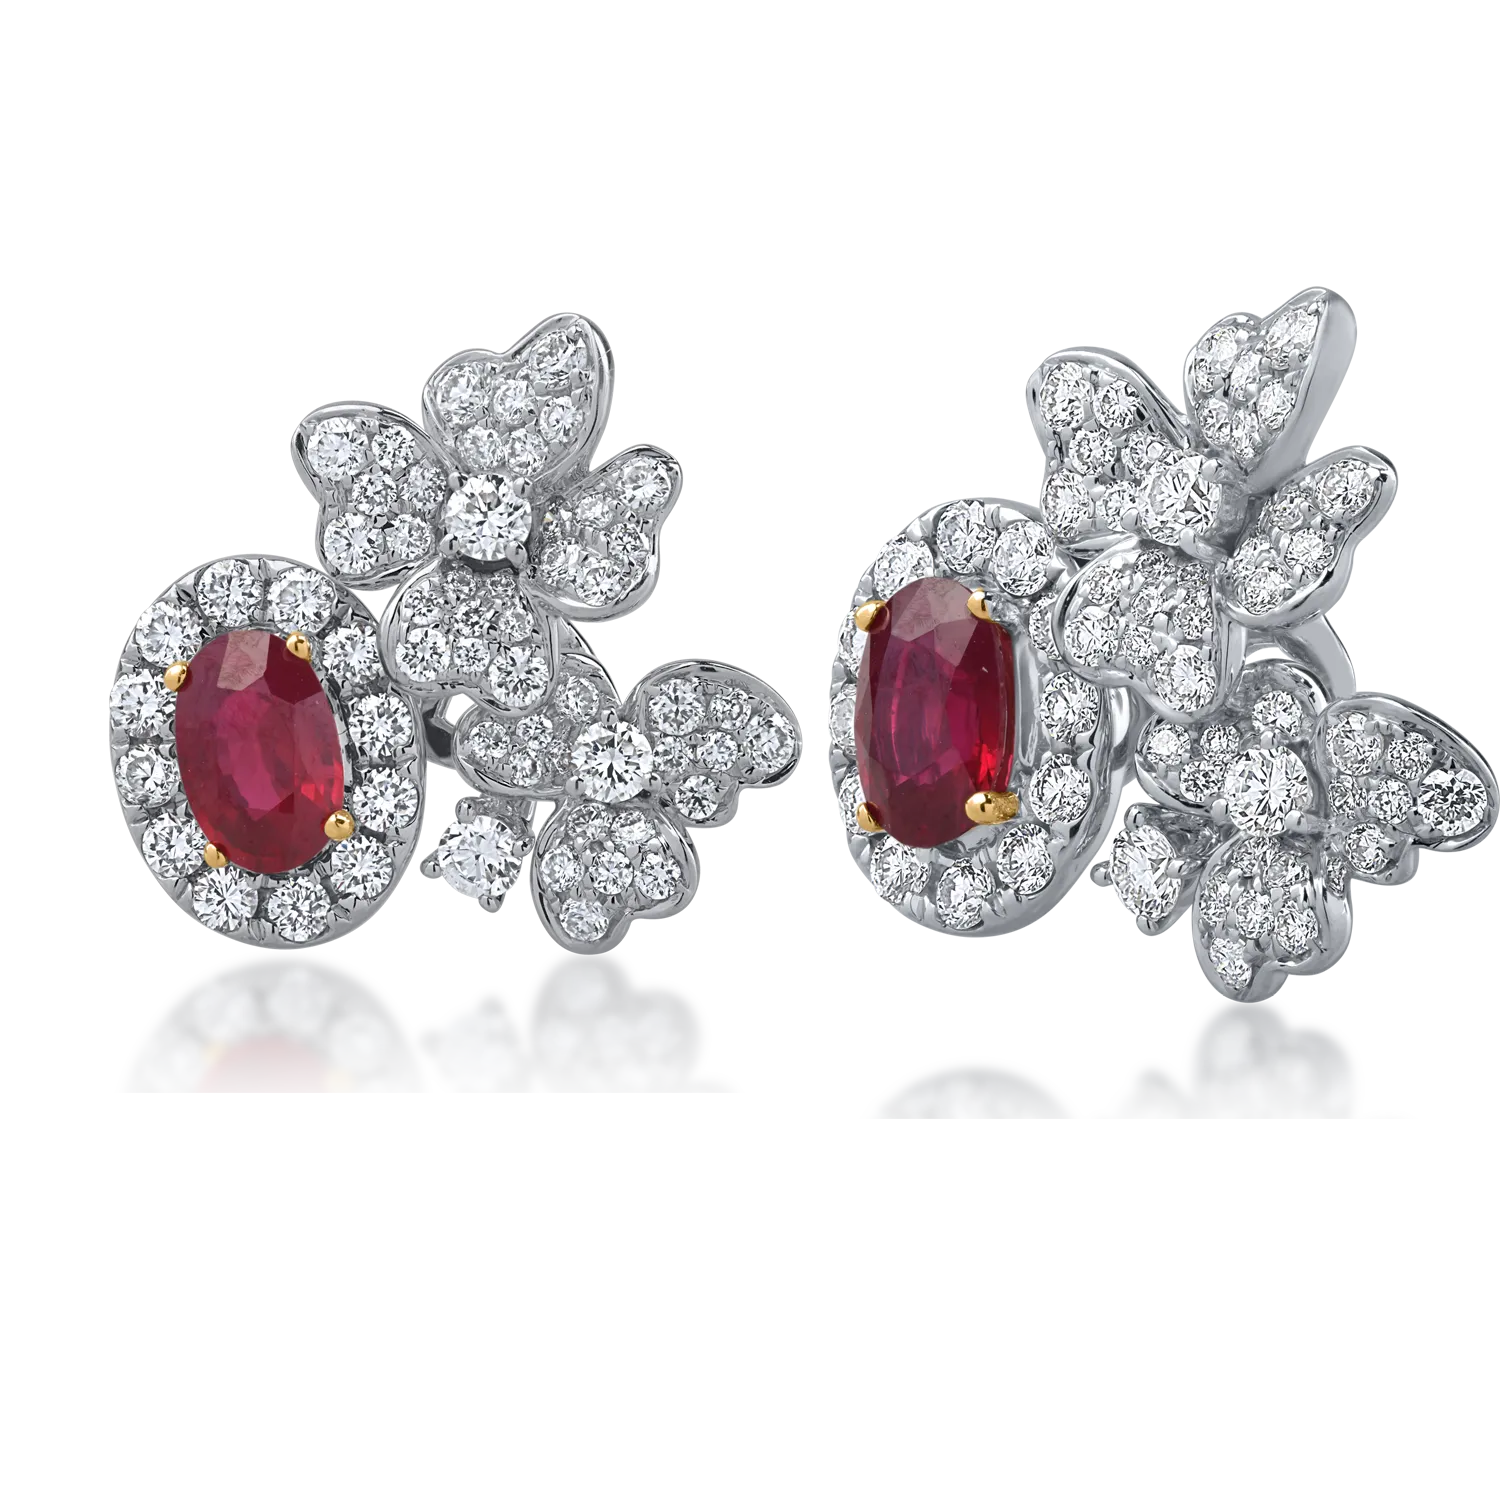 White gold earrings with 1.31ct diamonds and 1.09ct rubies